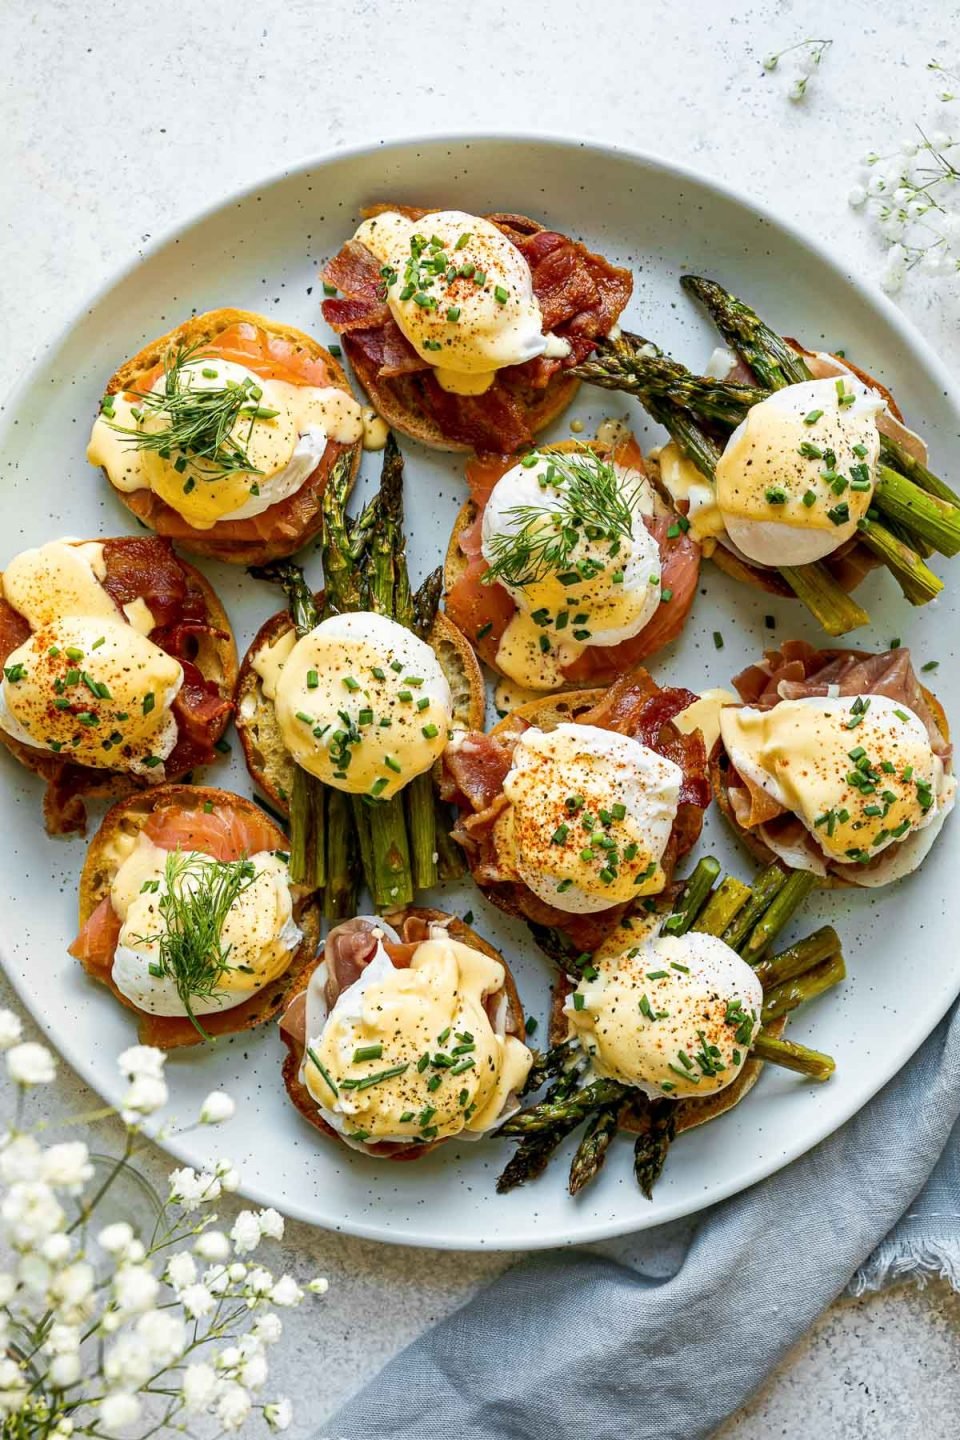 Eggs benedict variations with asparagus, bacon, prosciutto & smoked salmon atop a light blue speckled platter, atop a white surface. Next to the platter are baby's breath flowers & a blue linen napkin.